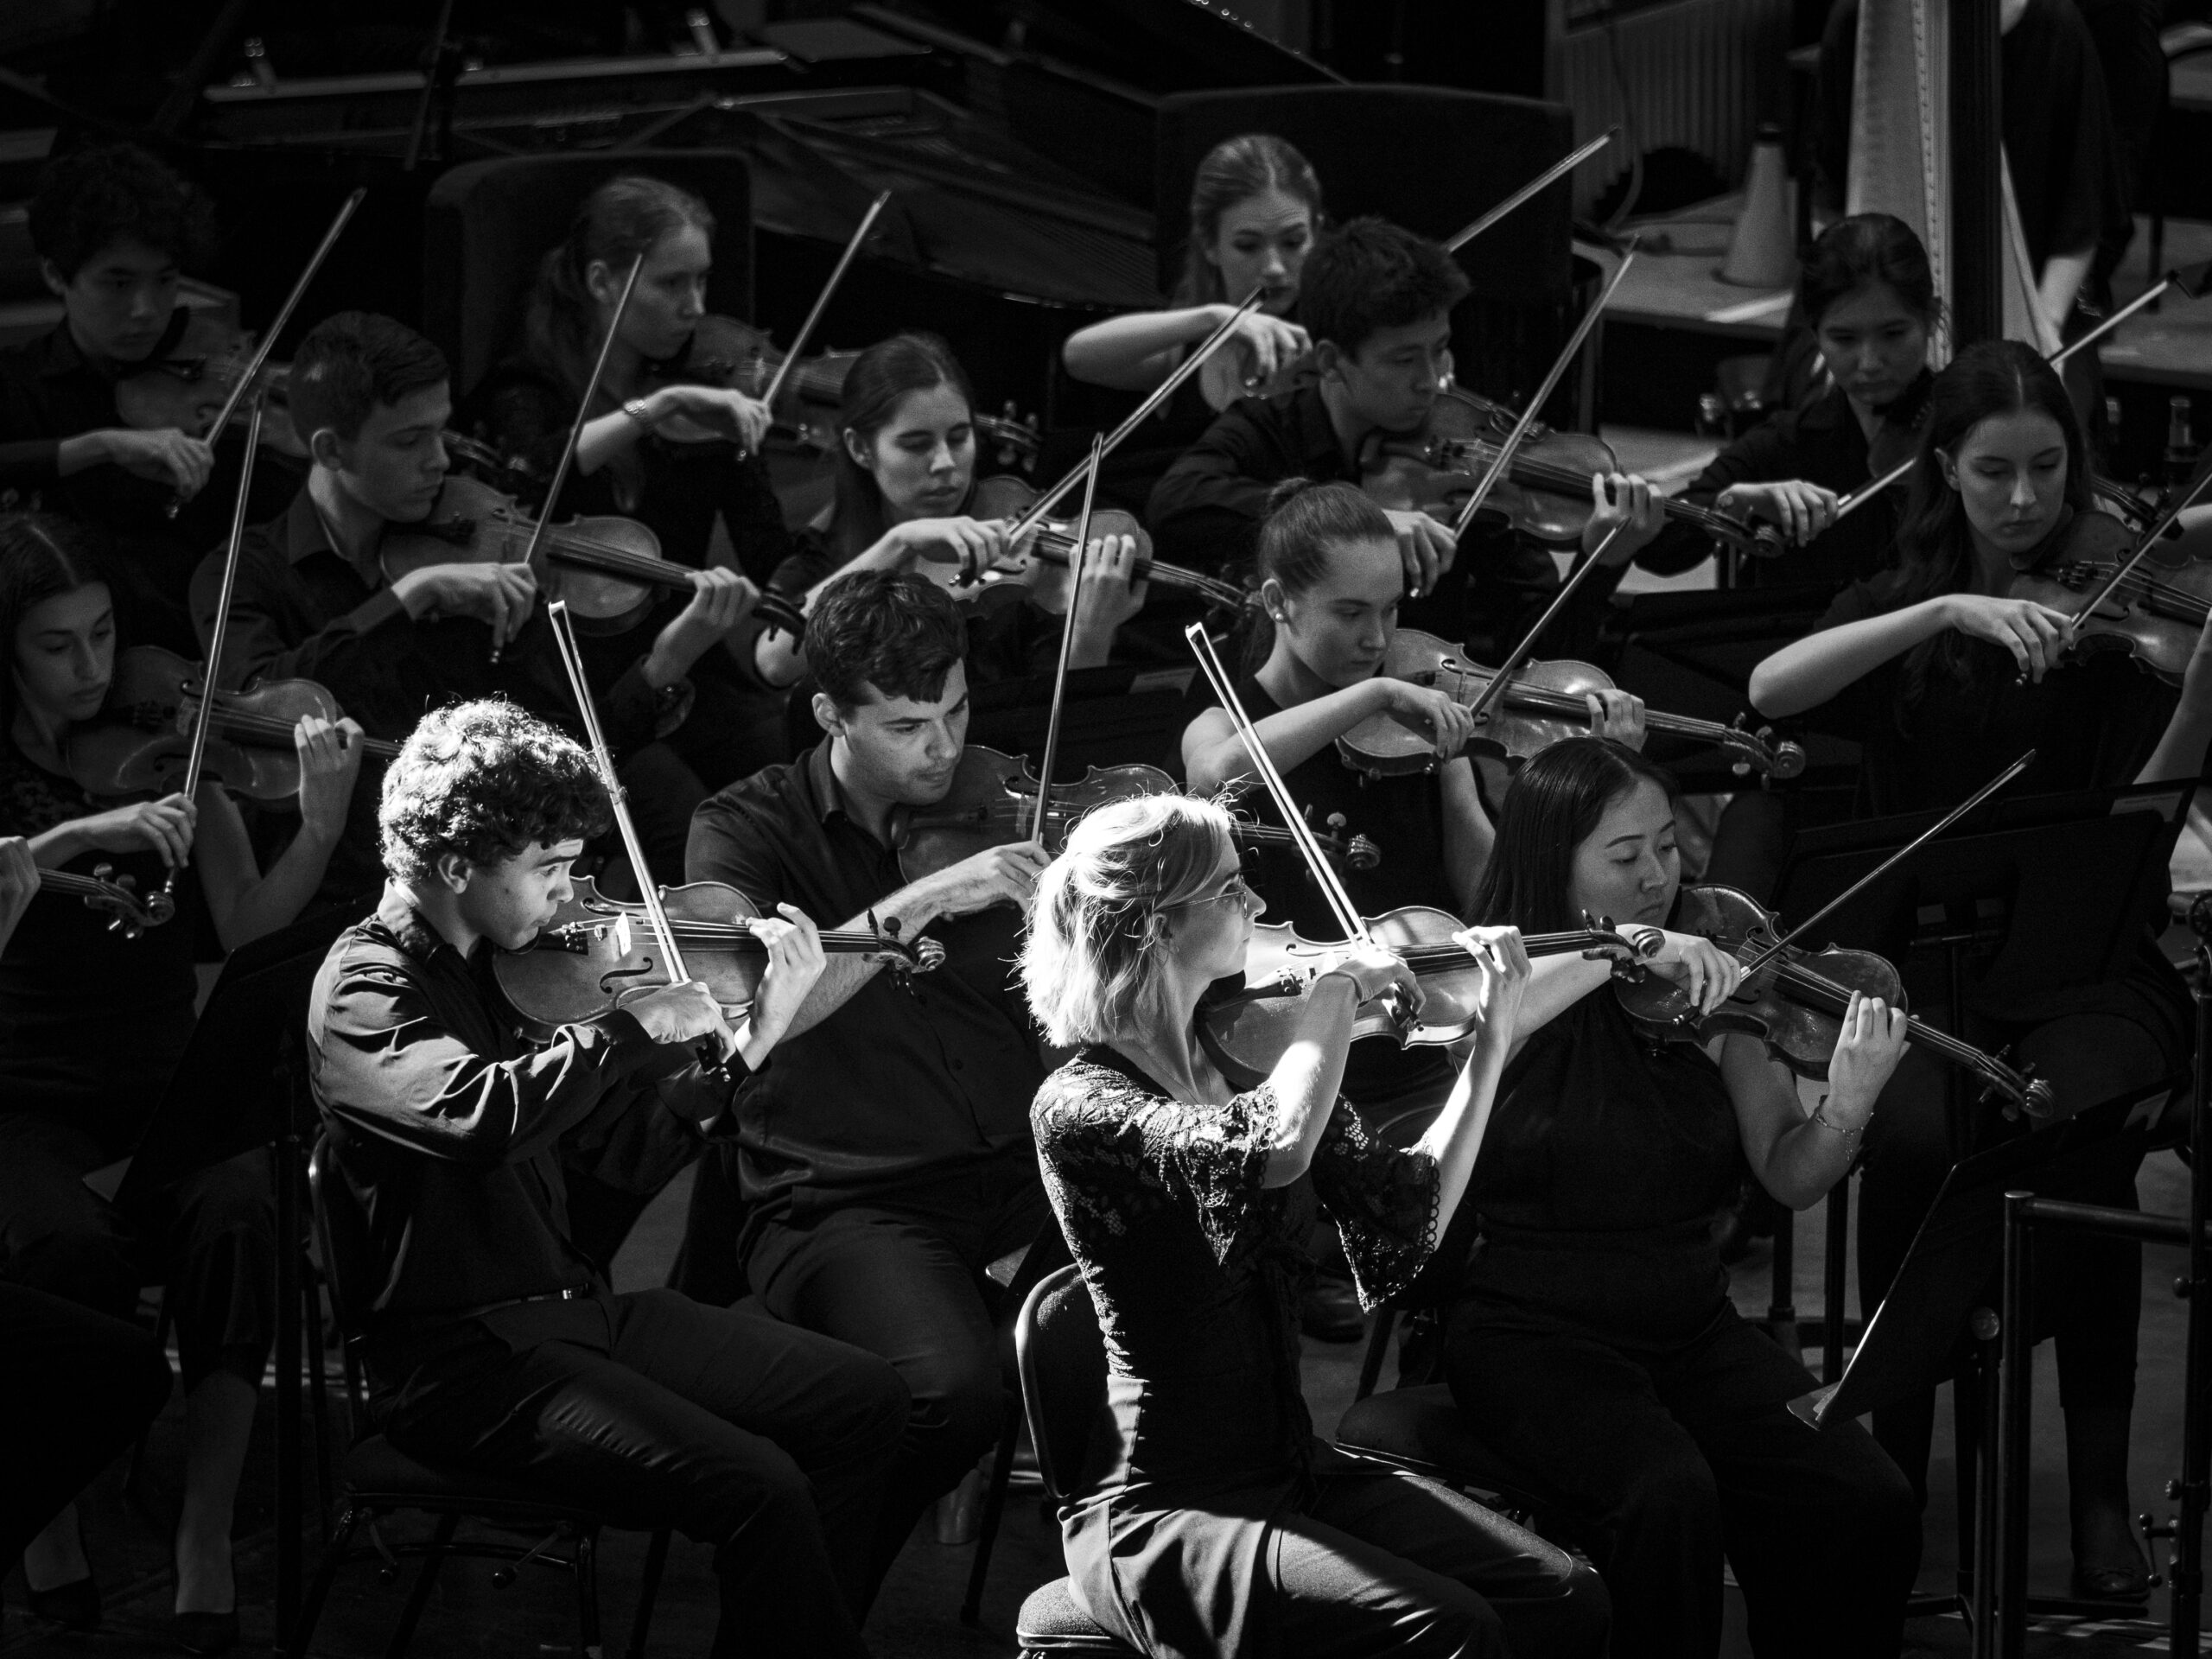 Australian Youth Orchestra